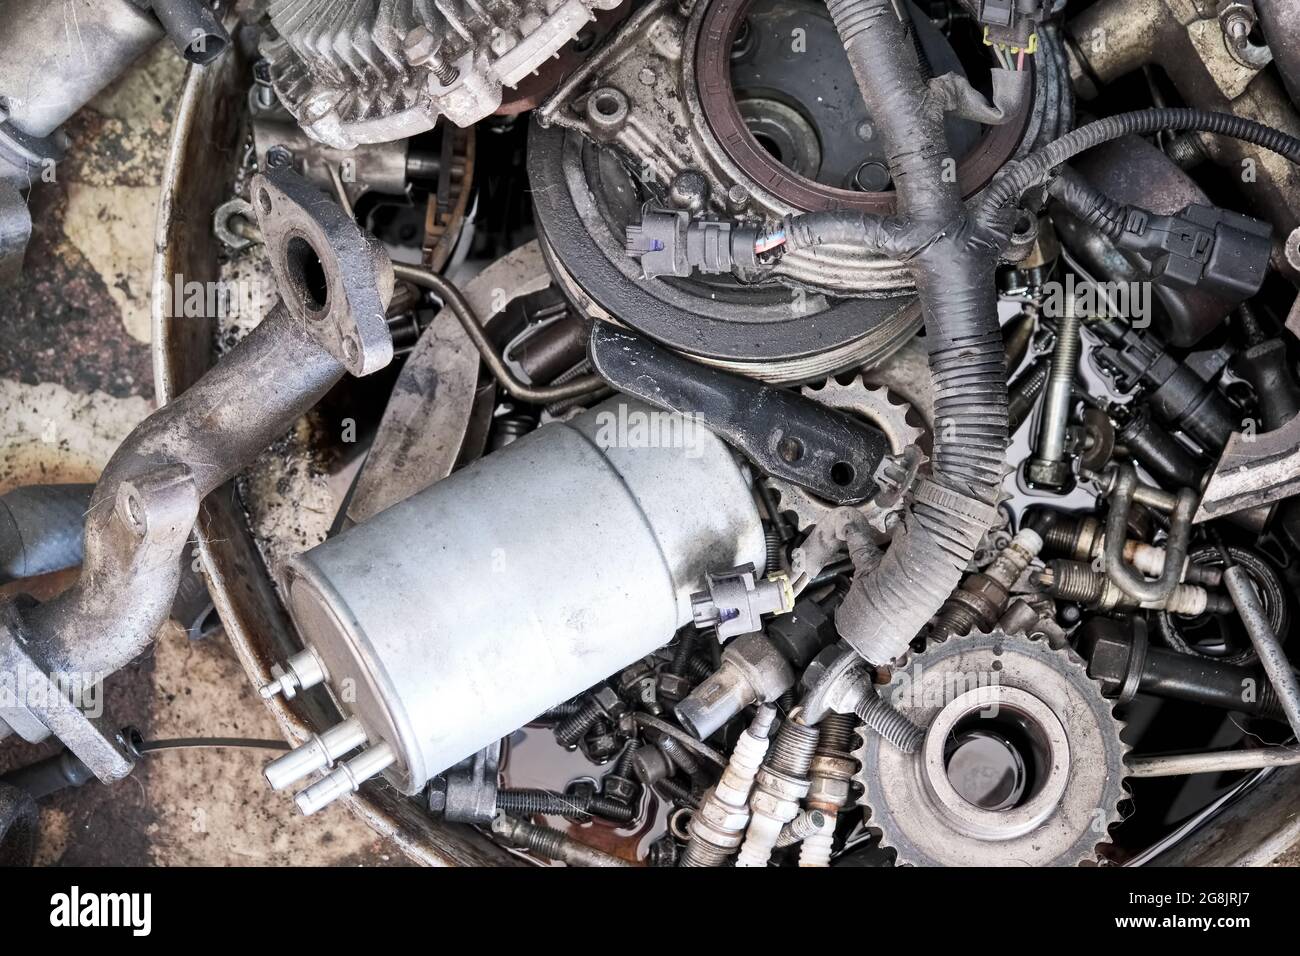 Car motor engine with dismantled fuel filter. Stock Photo